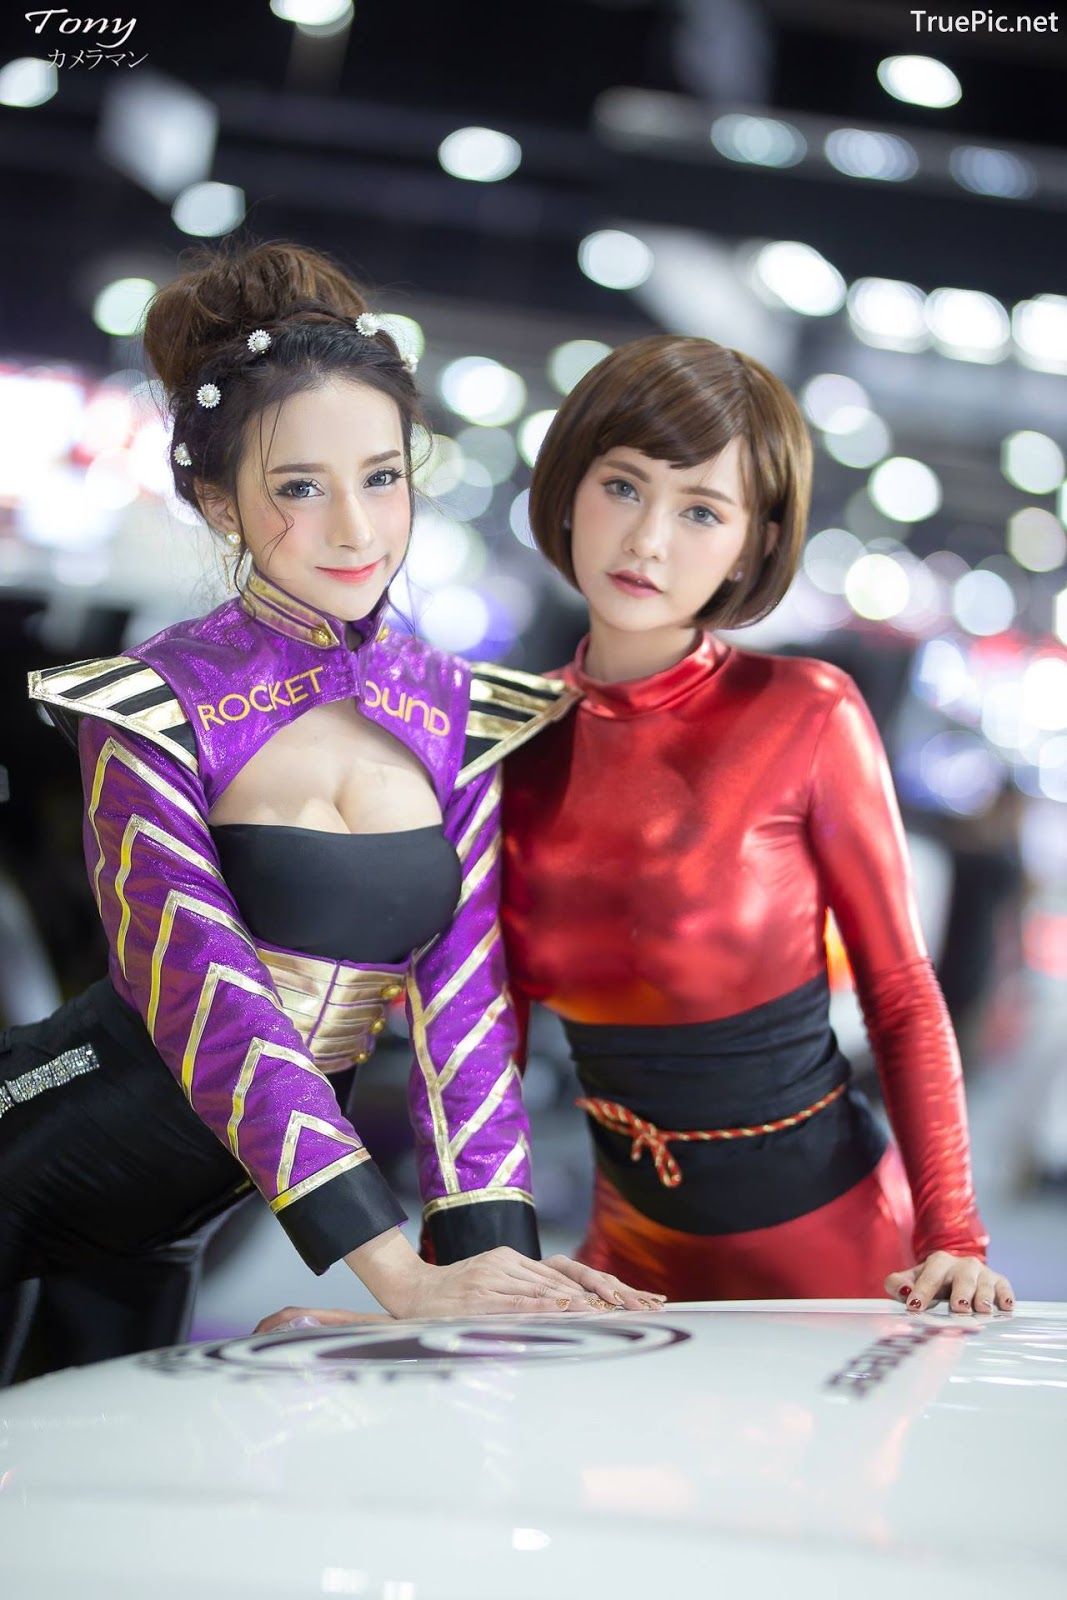 Image-Thailand-Hot-Model-Thai-Racing-Girl-At-Motor-Expo-2018-TruePic.net- Picture-88